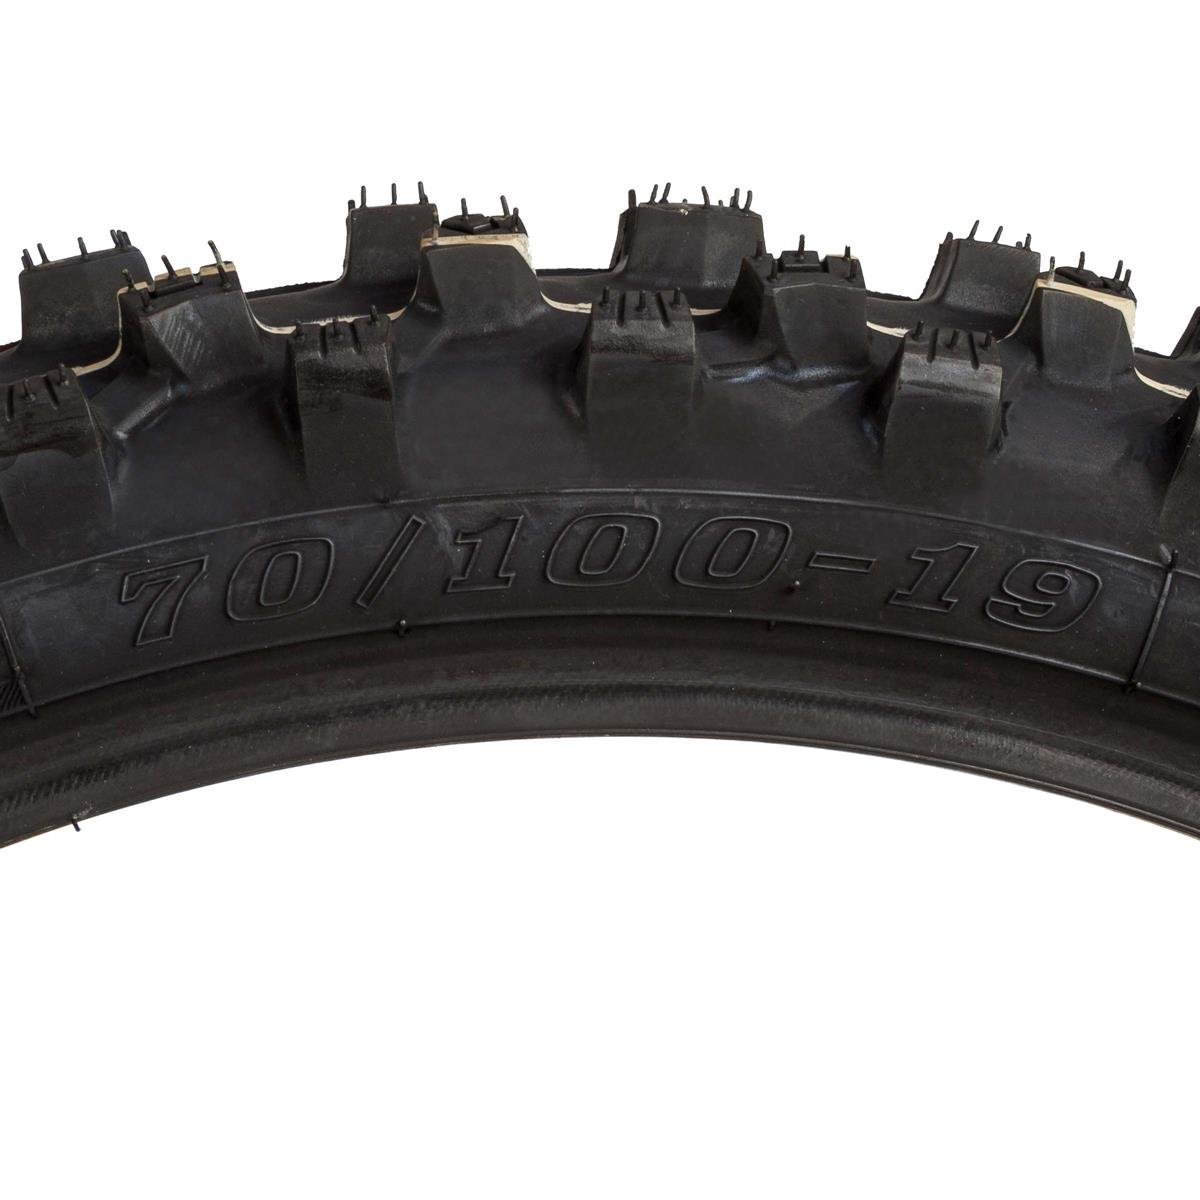 Dunlop Geomax MX33 80/100-21 Front Tire 45234071